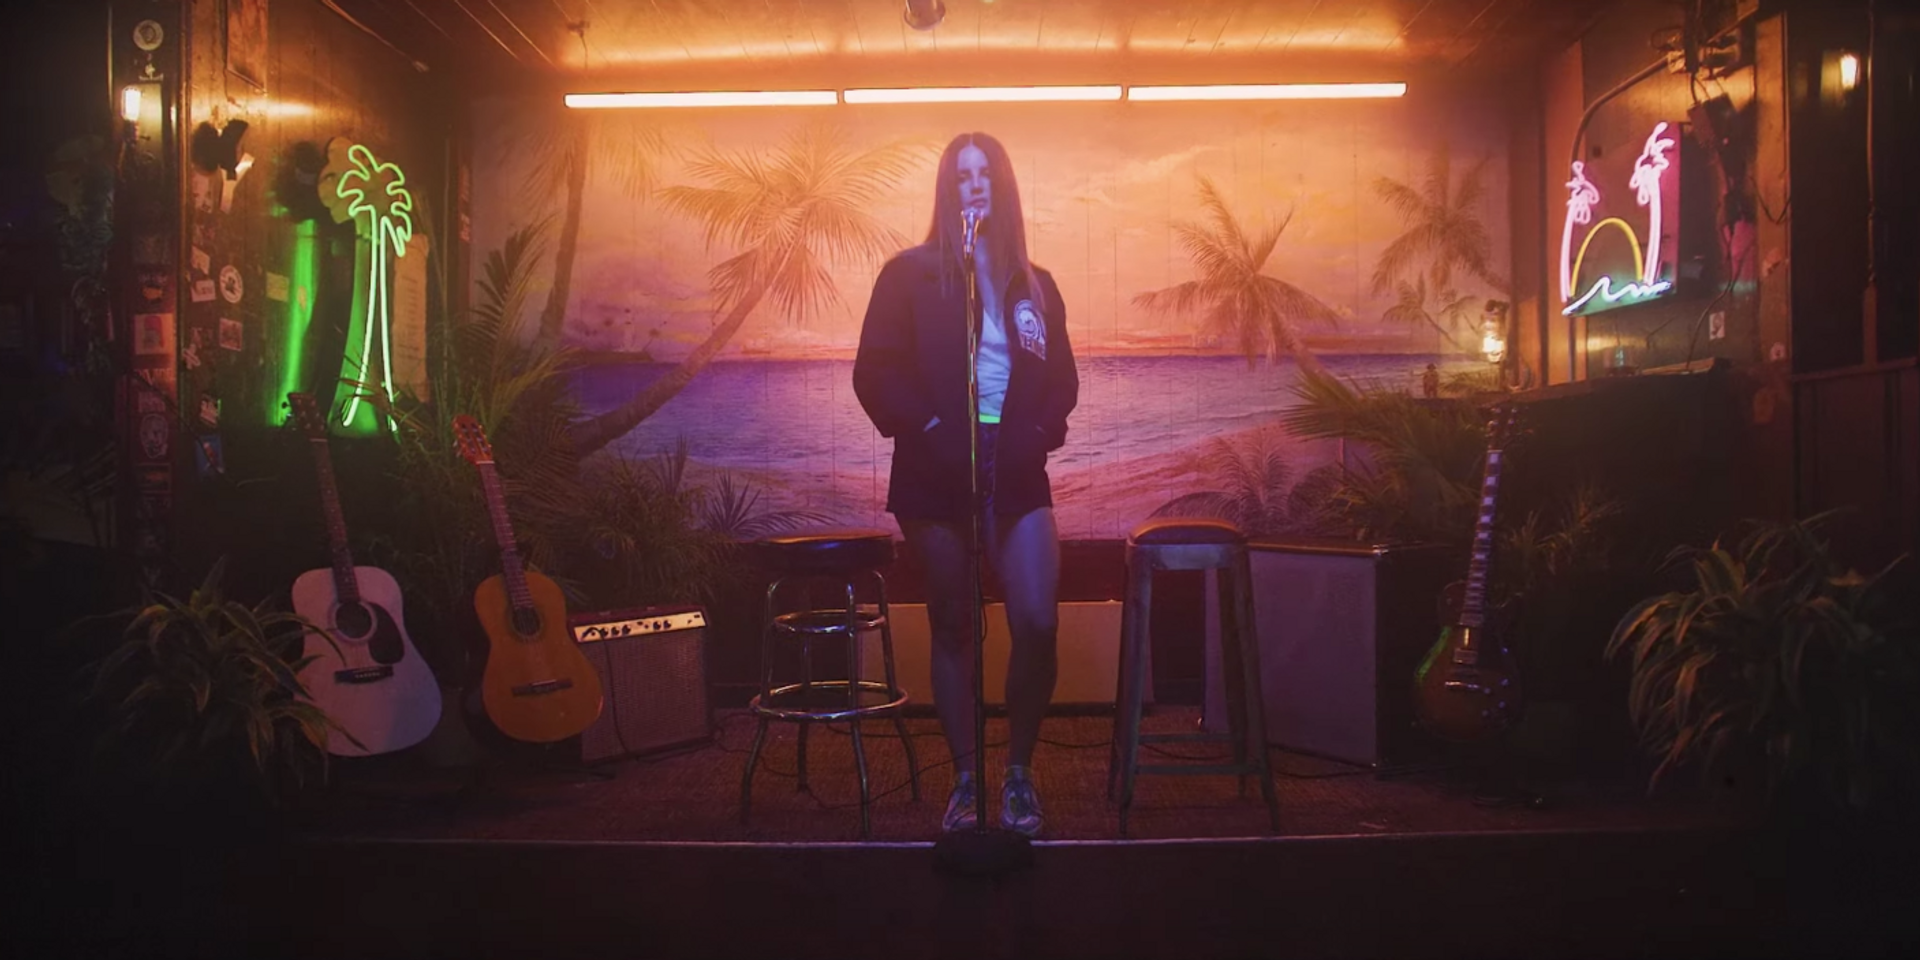 Lana Del Rey shares two new songs with accompanying music video – watch